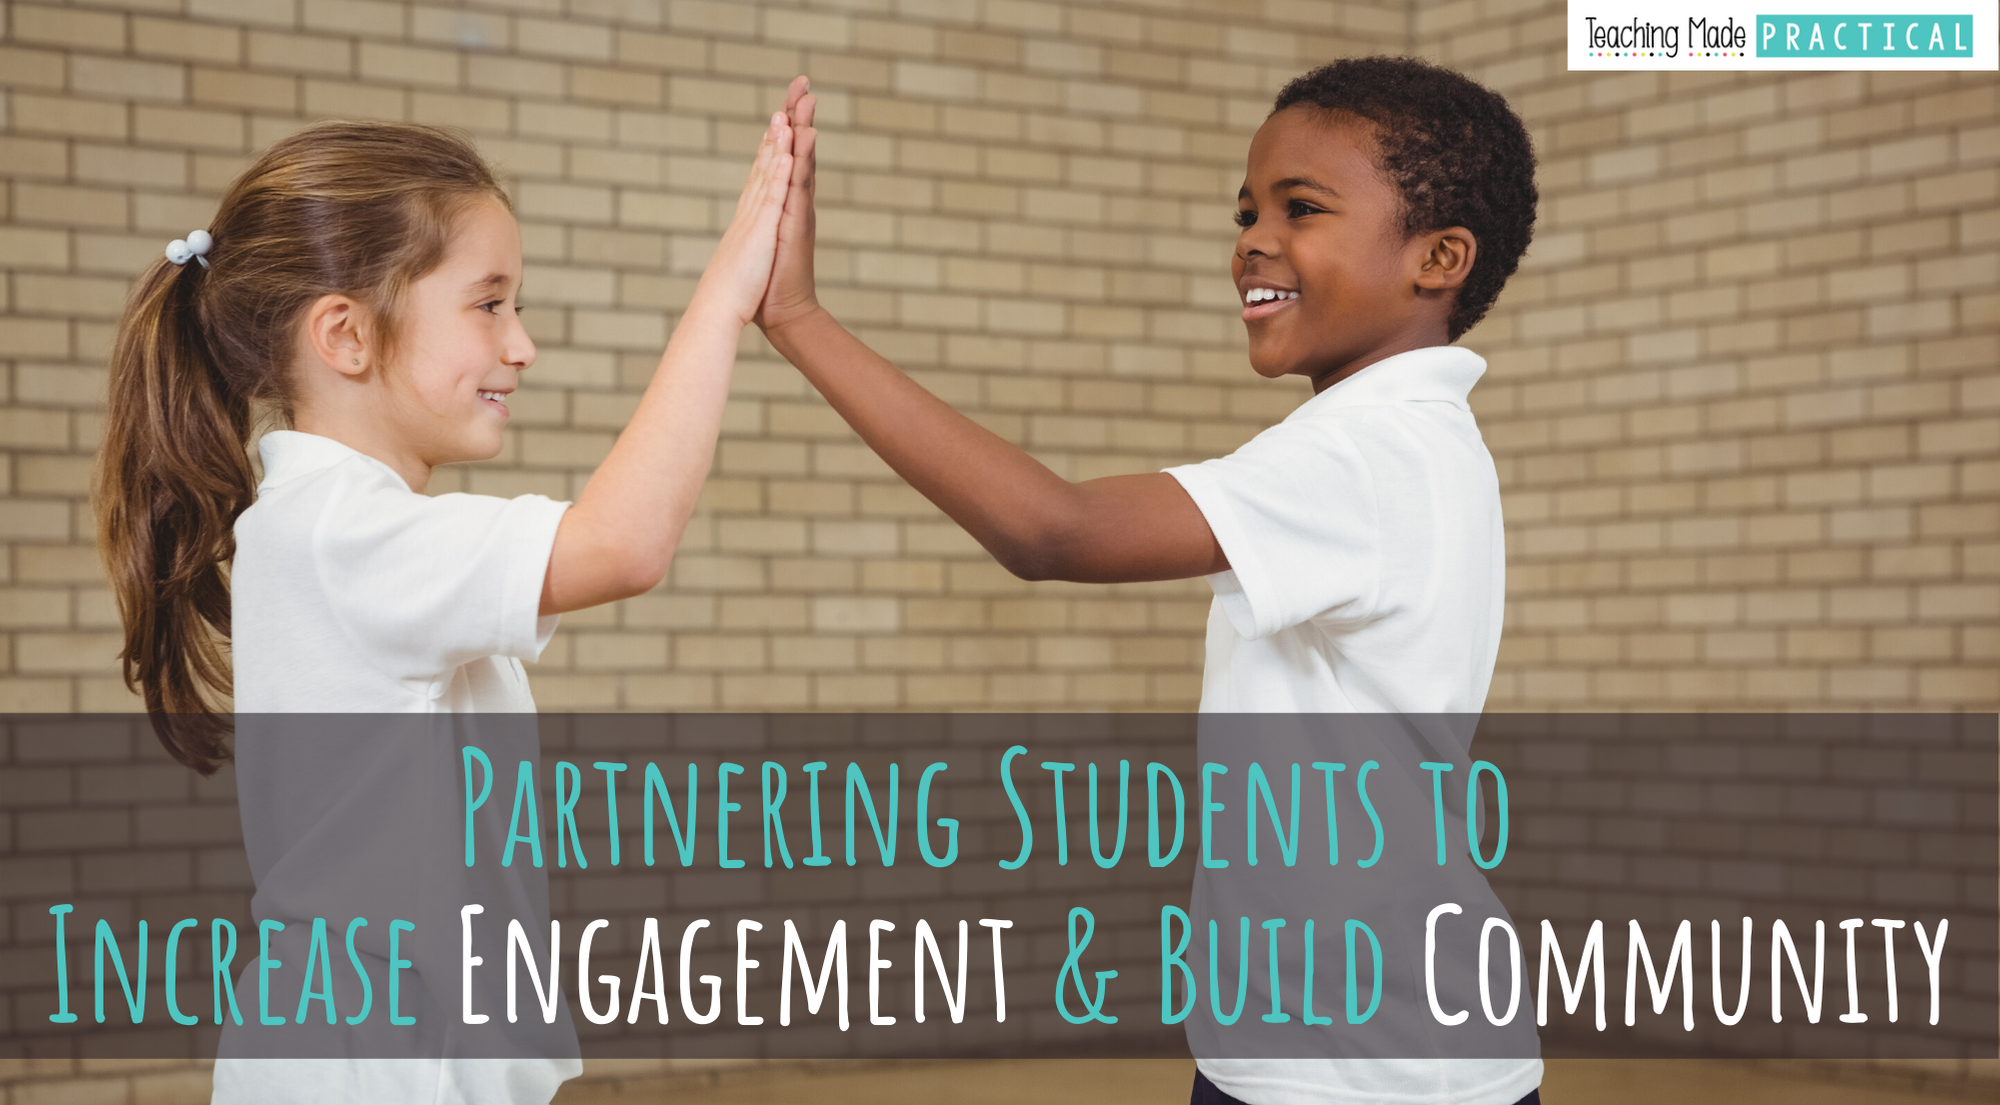 Classroom Management Tips for Partnering Students Up